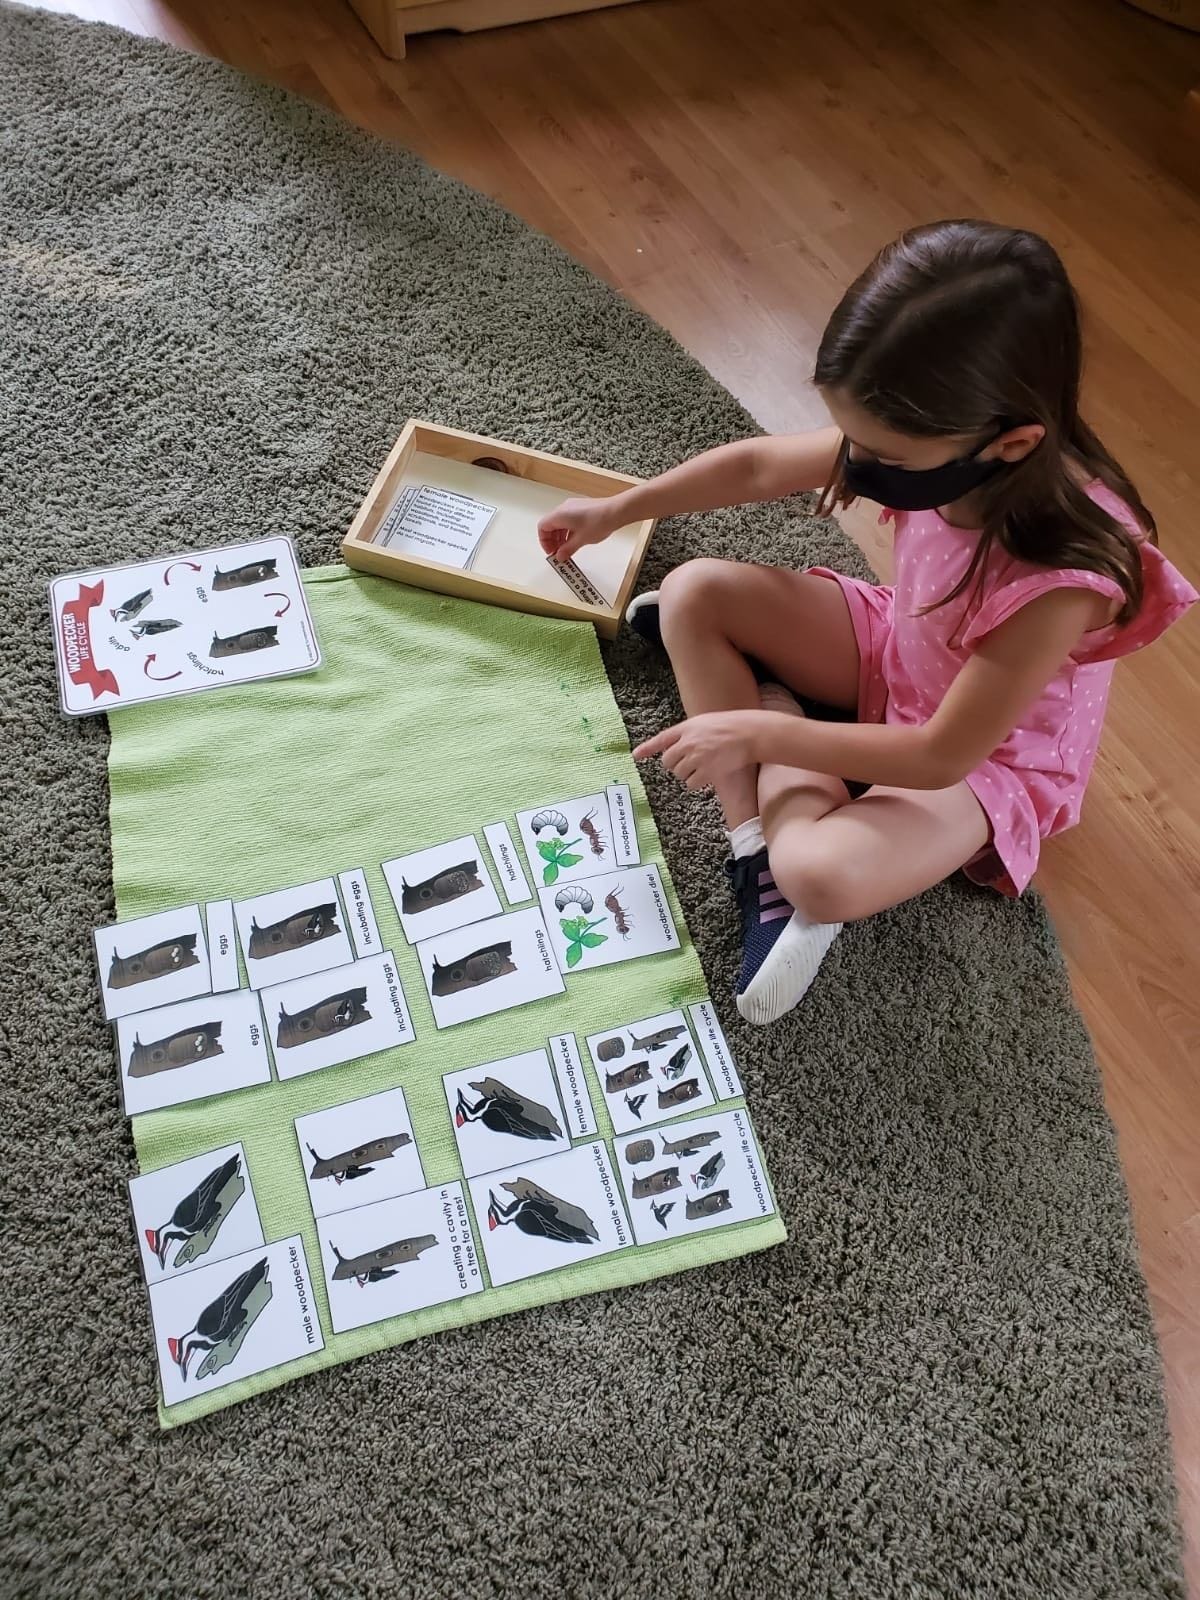 Paoli Campus: A child learning the life cycle of a woodpecker by matching the 3 part cards. Children learn to appreciate all living things around them through t